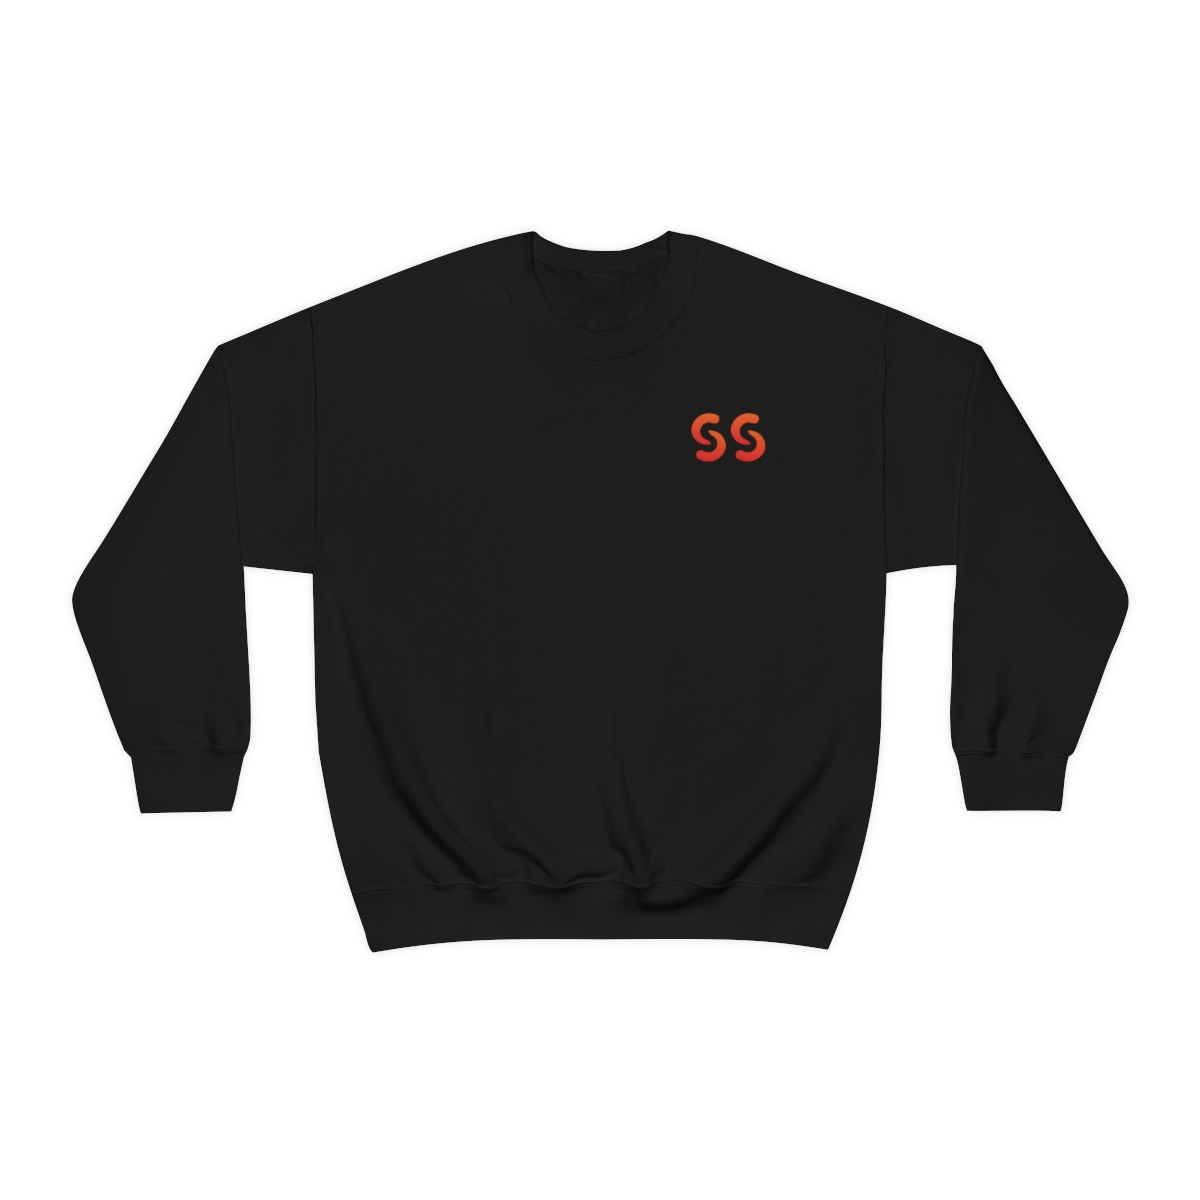 Front view of a black sweatshirt with stylized "SS" over the left breast denoting sickle cell trait status.